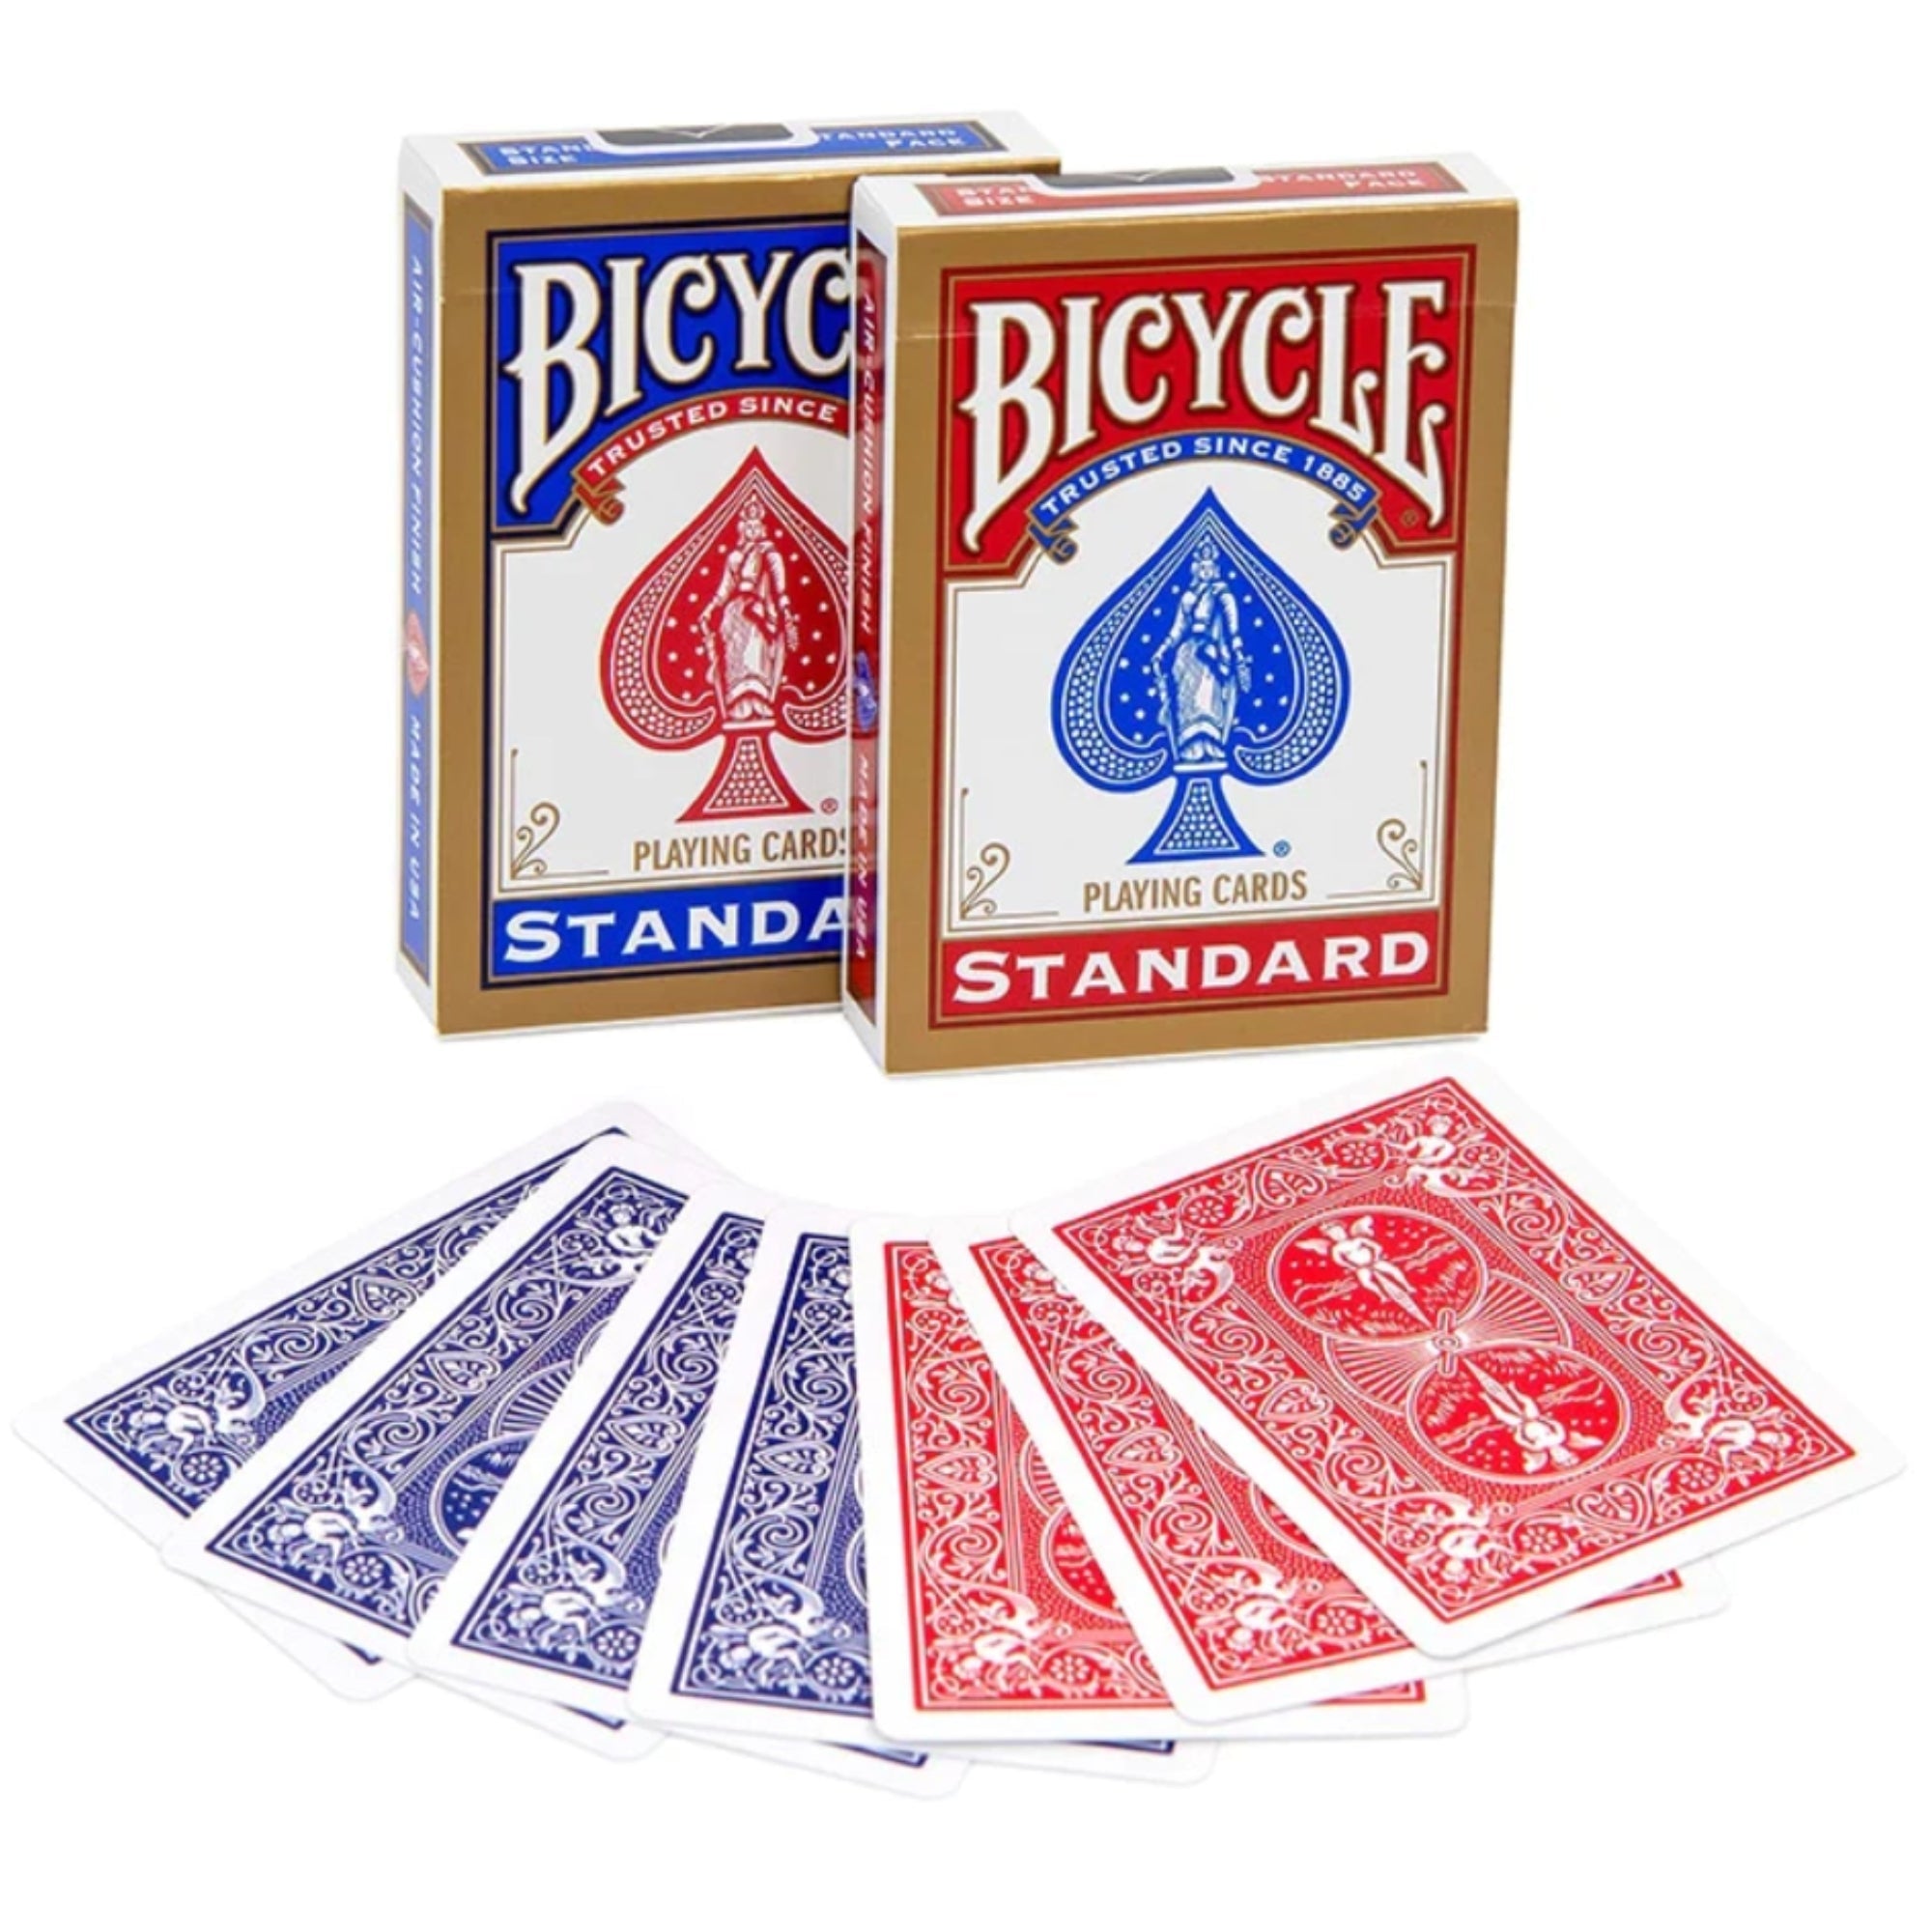 Bicycle Standard Deck, red and blue together